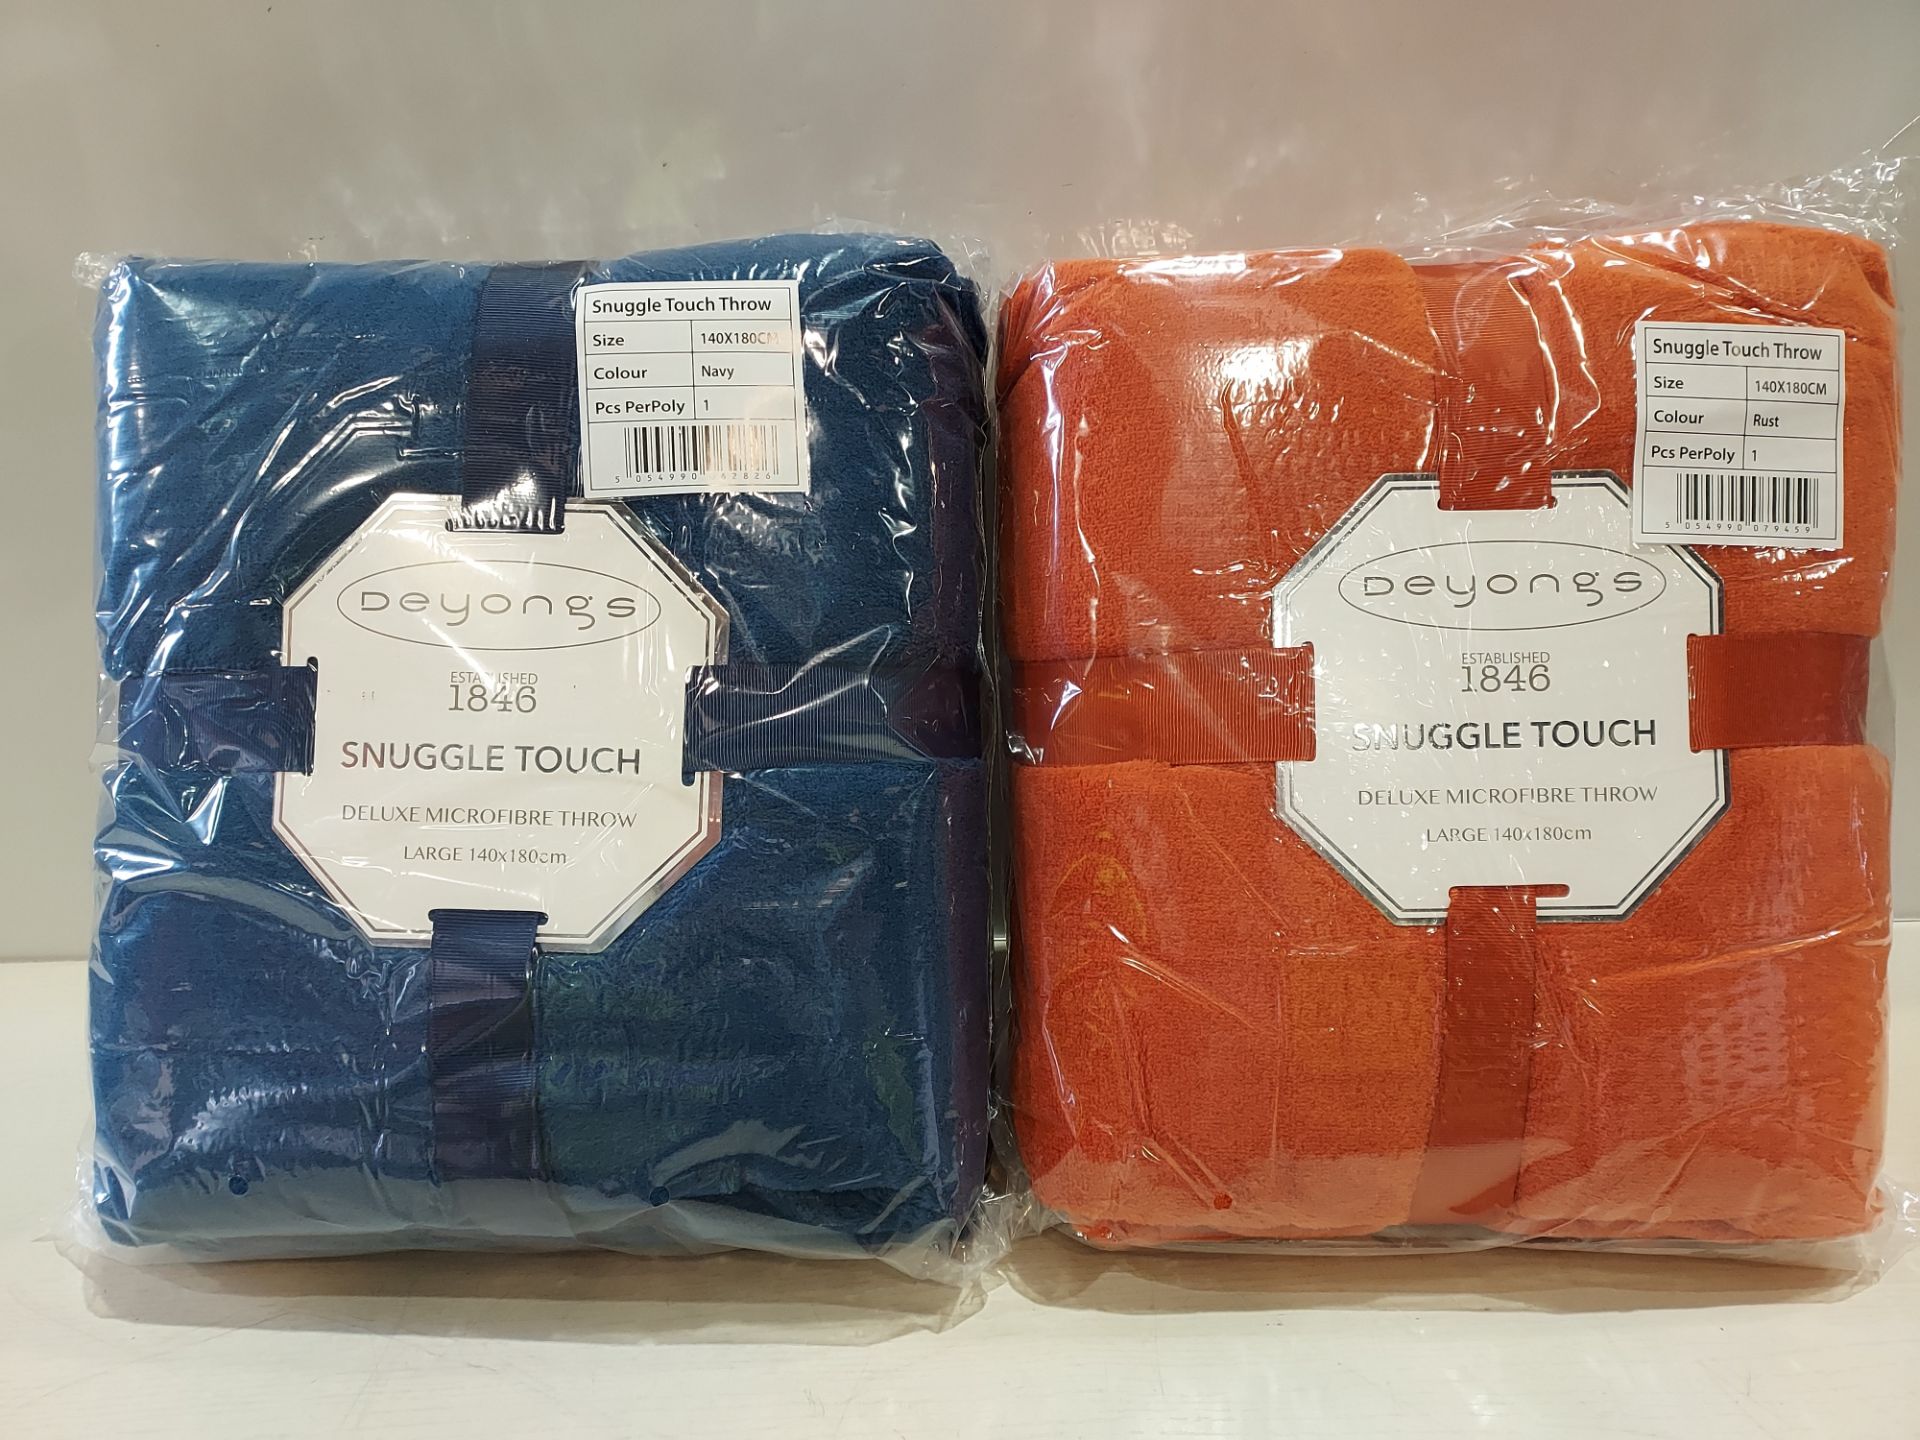 24 X BRAND NEW DEYONGS SNUGGLE TOUCH DELUXE MICROFIBRE THROWS IN MIXED COLOURS TO INCLUDE RUST /